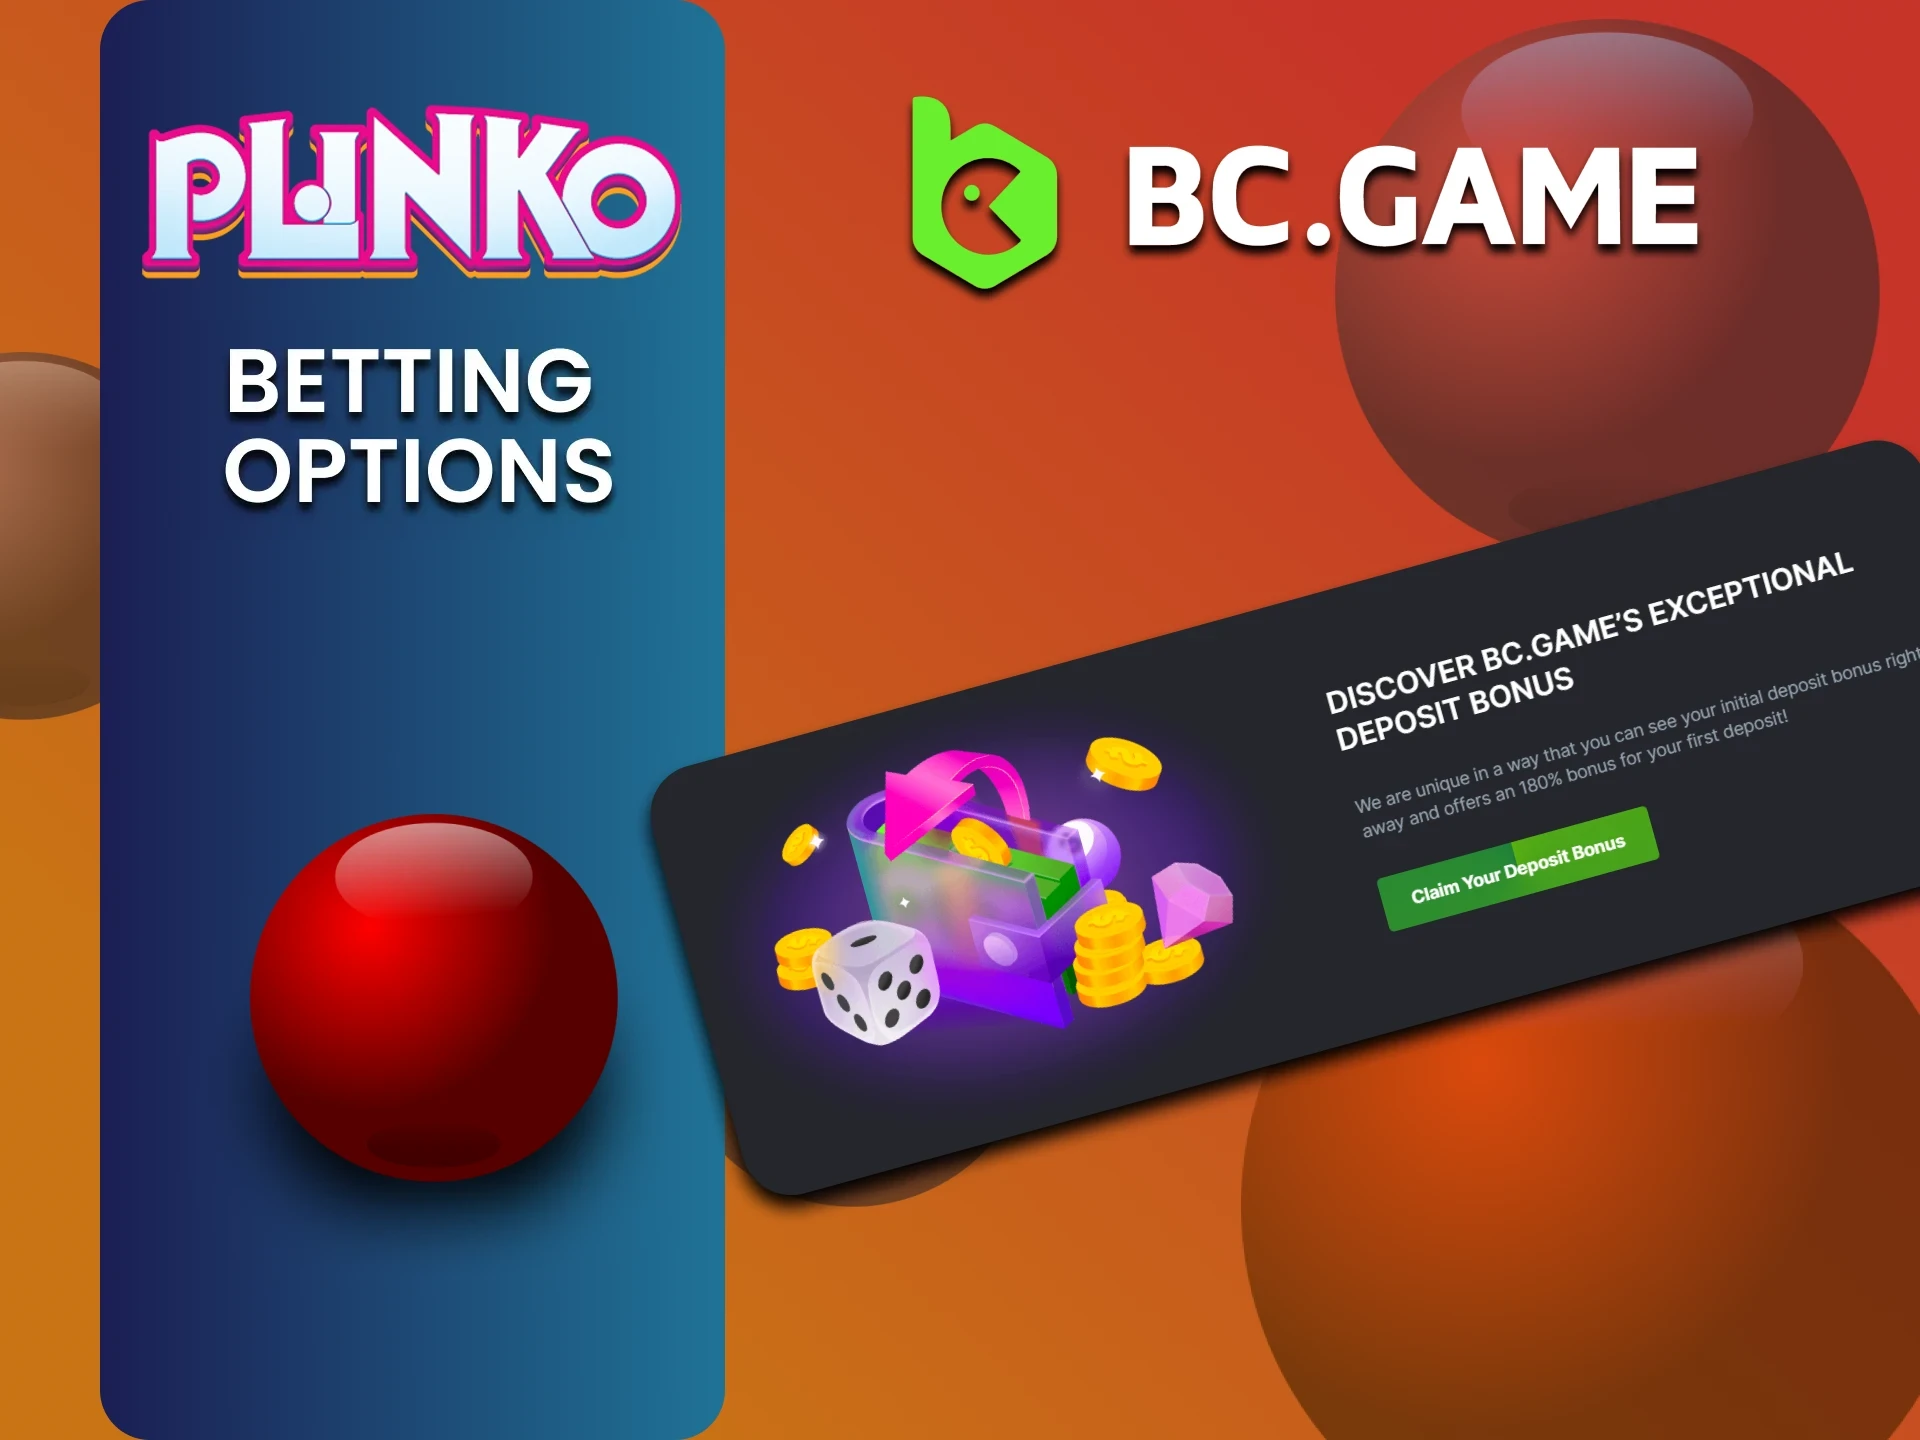 BC Game Plinko offers a welcome bonus on the first four deposits.